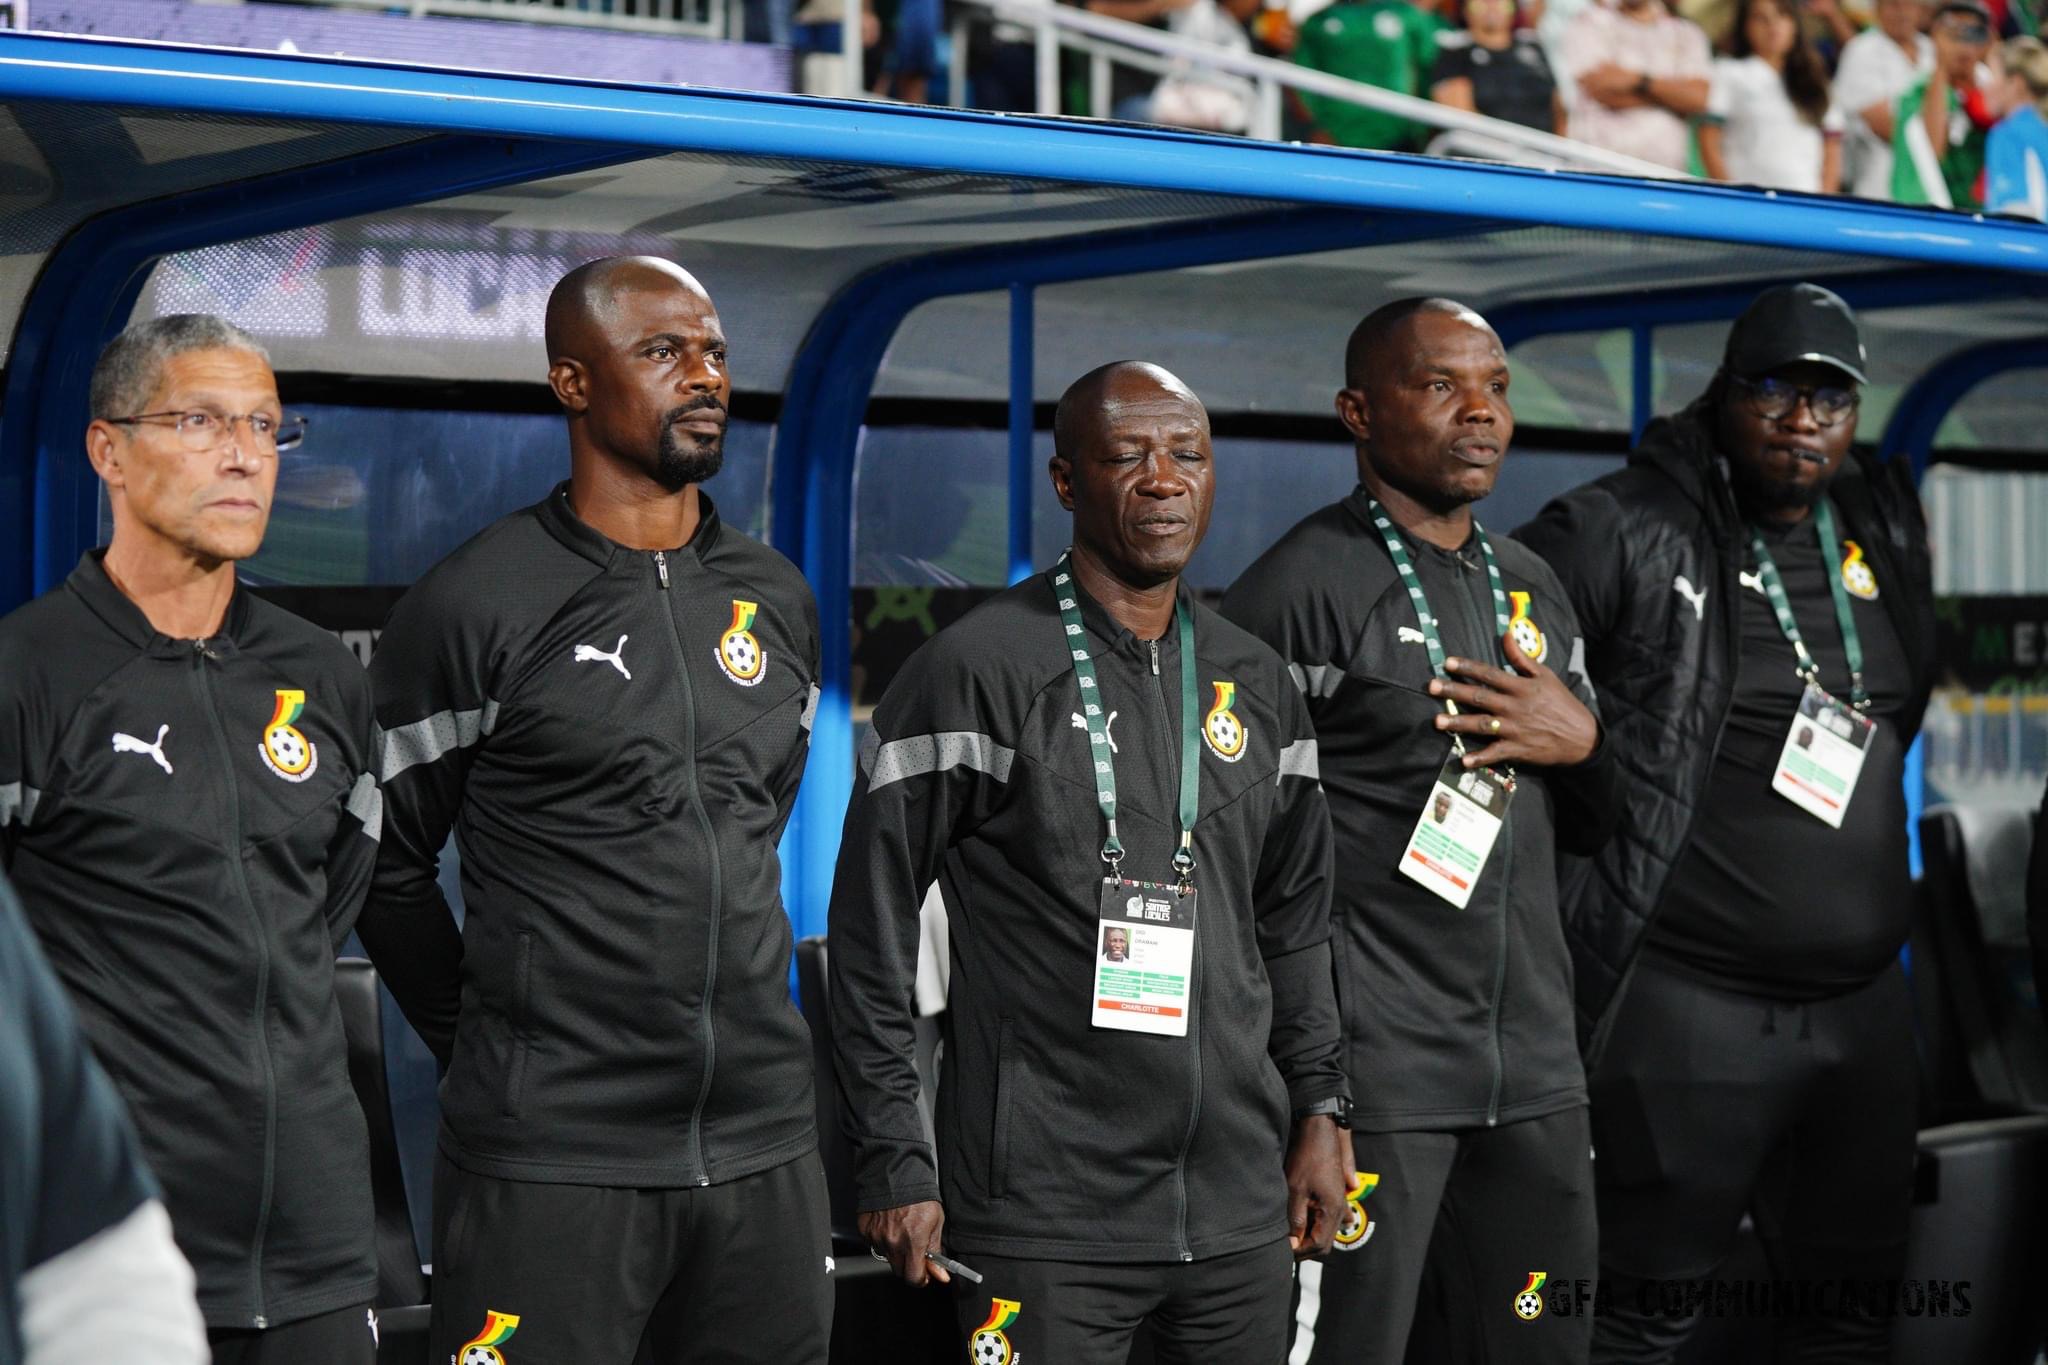 2023 Africa Cup of Nations: We took responsibility as coaches for Ghana’s poor performance - George Boateng